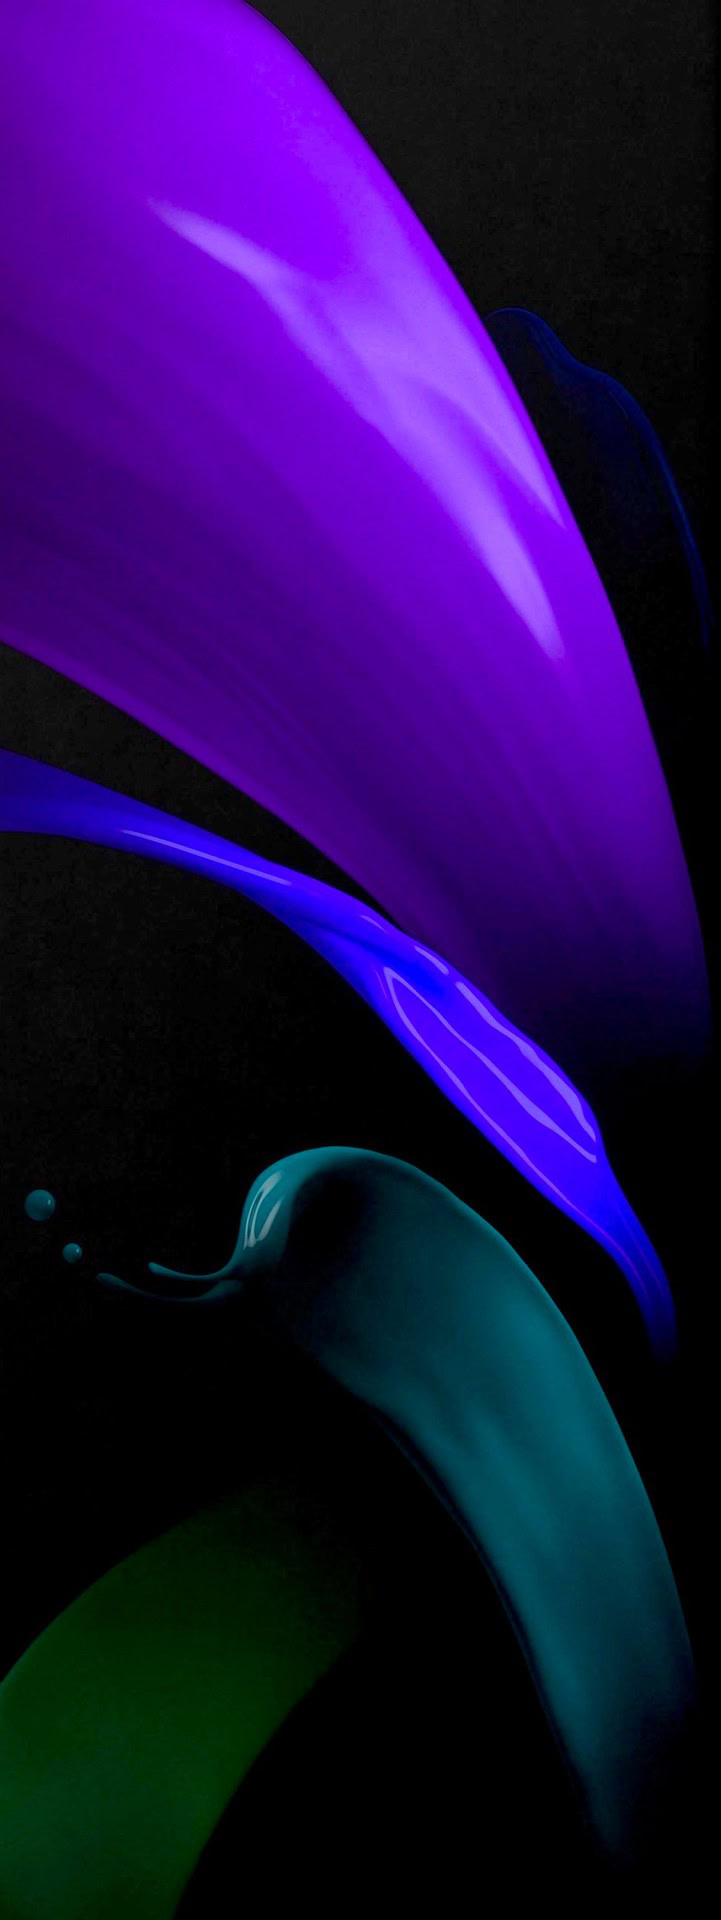 Here Are The Samsung Galaxy Z Fold 2 Wallpapers Android Authority